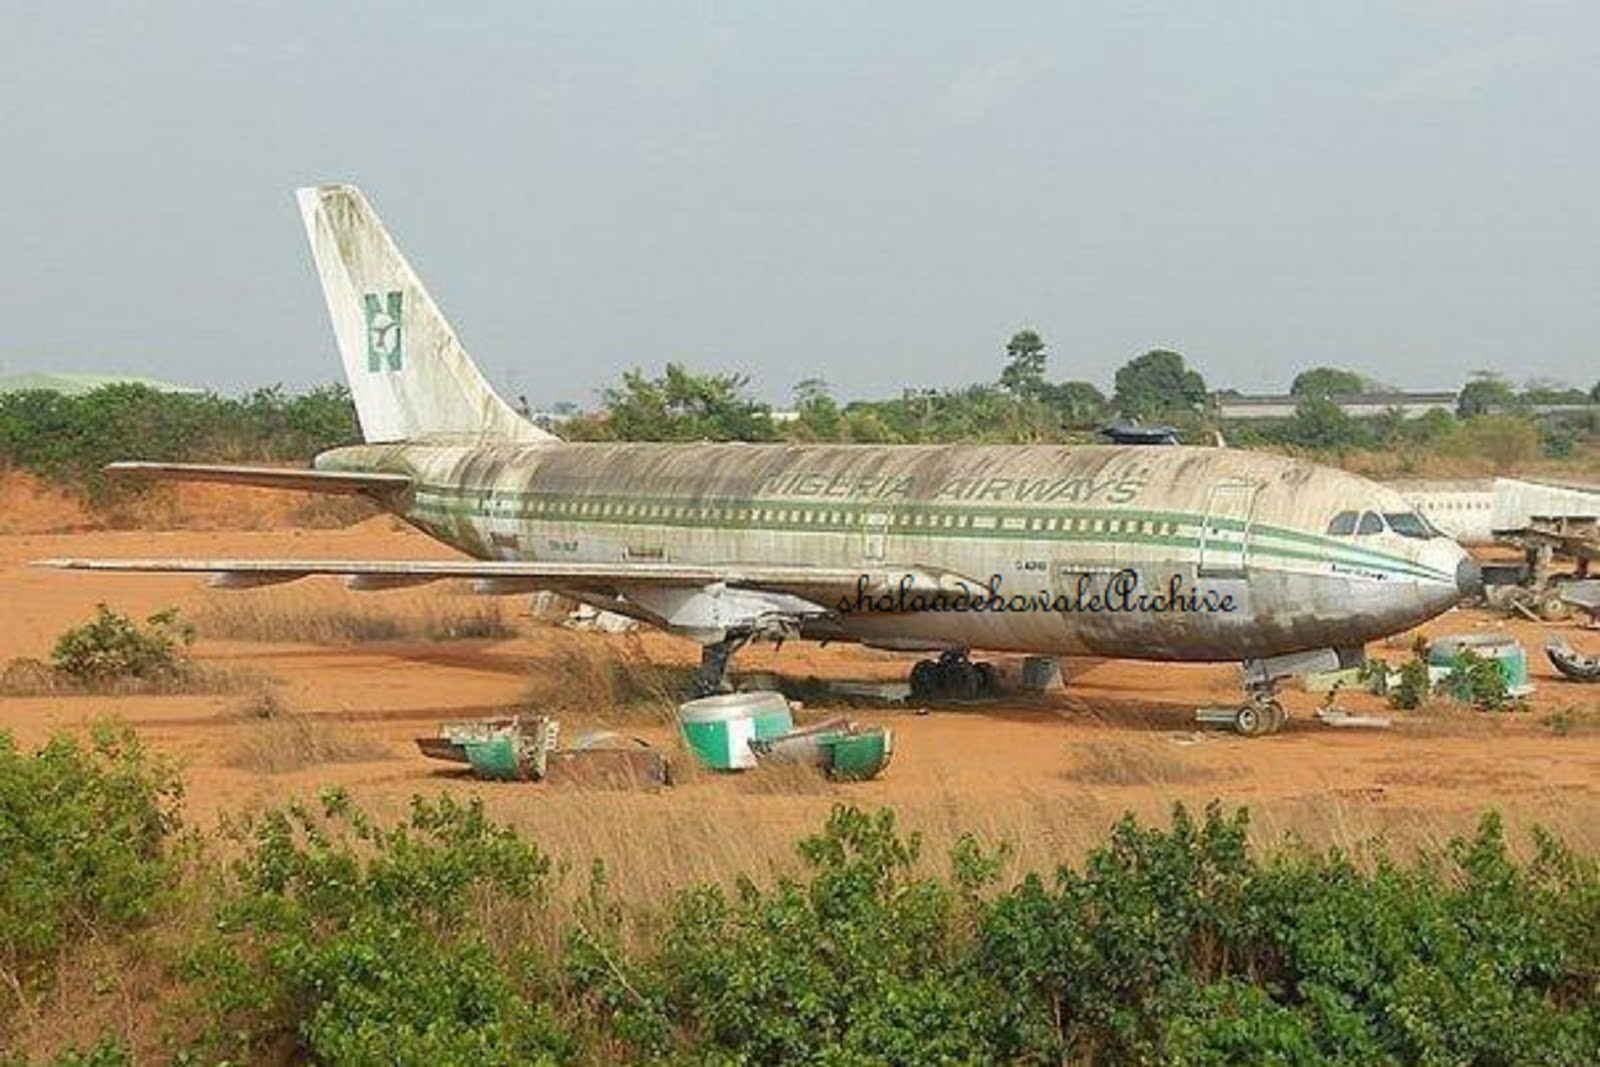 Union Wants Removal Of Abandoned Aircraft | Pulse Nigeria